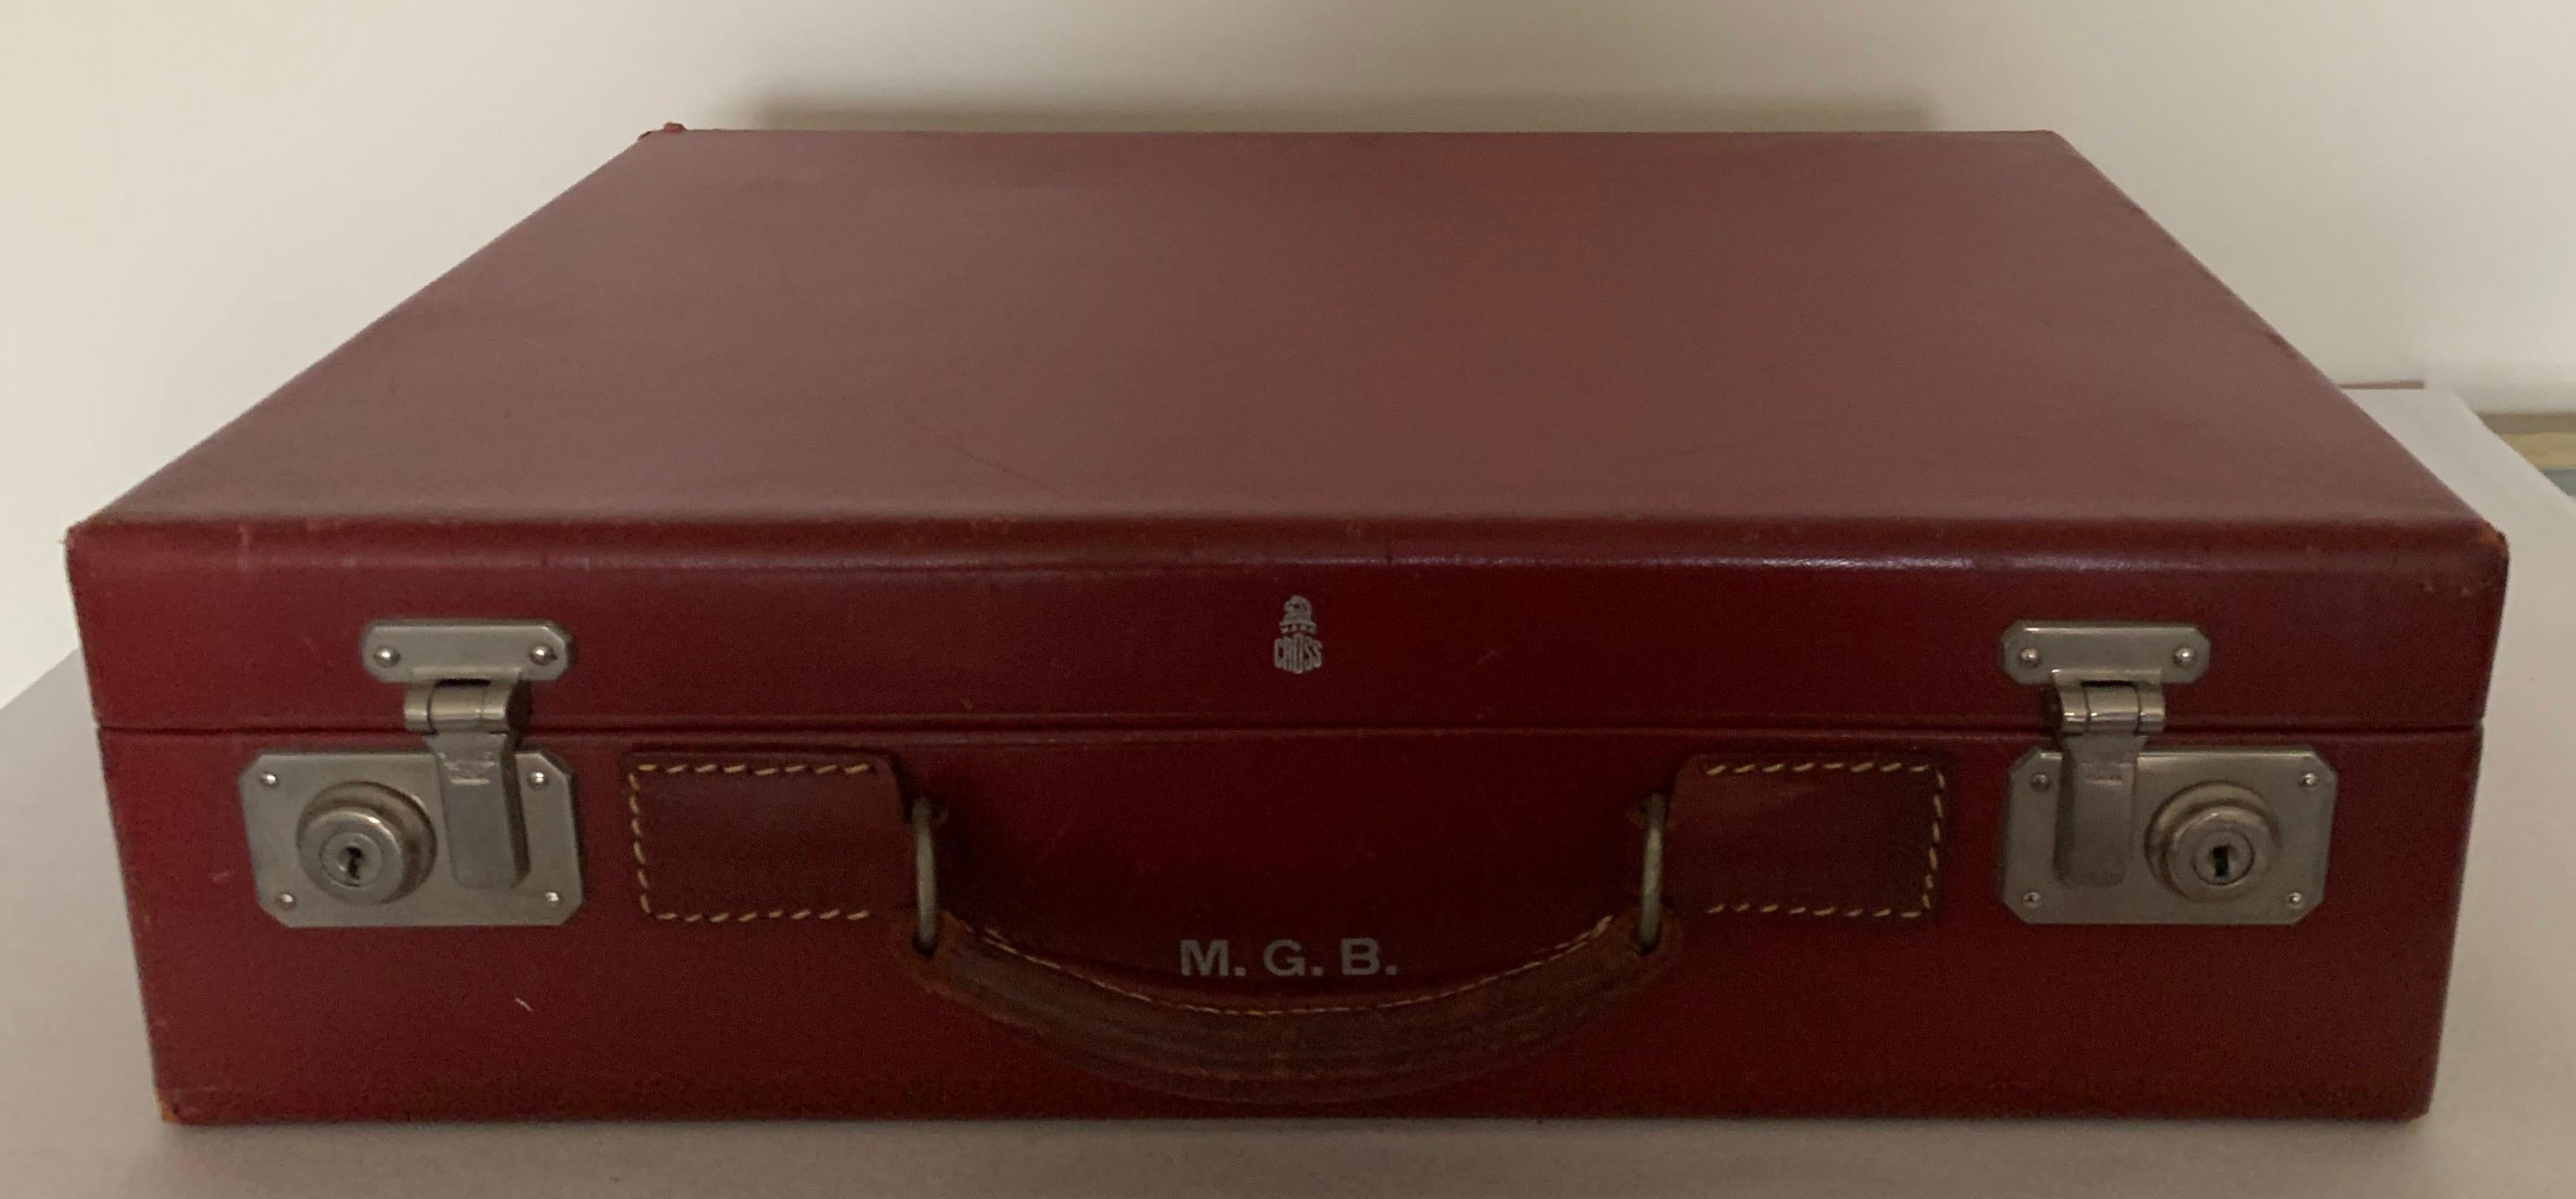 1950s red leather travel suitcase by Mark across. Ruby red smooth calf leather with tan fabric interior.